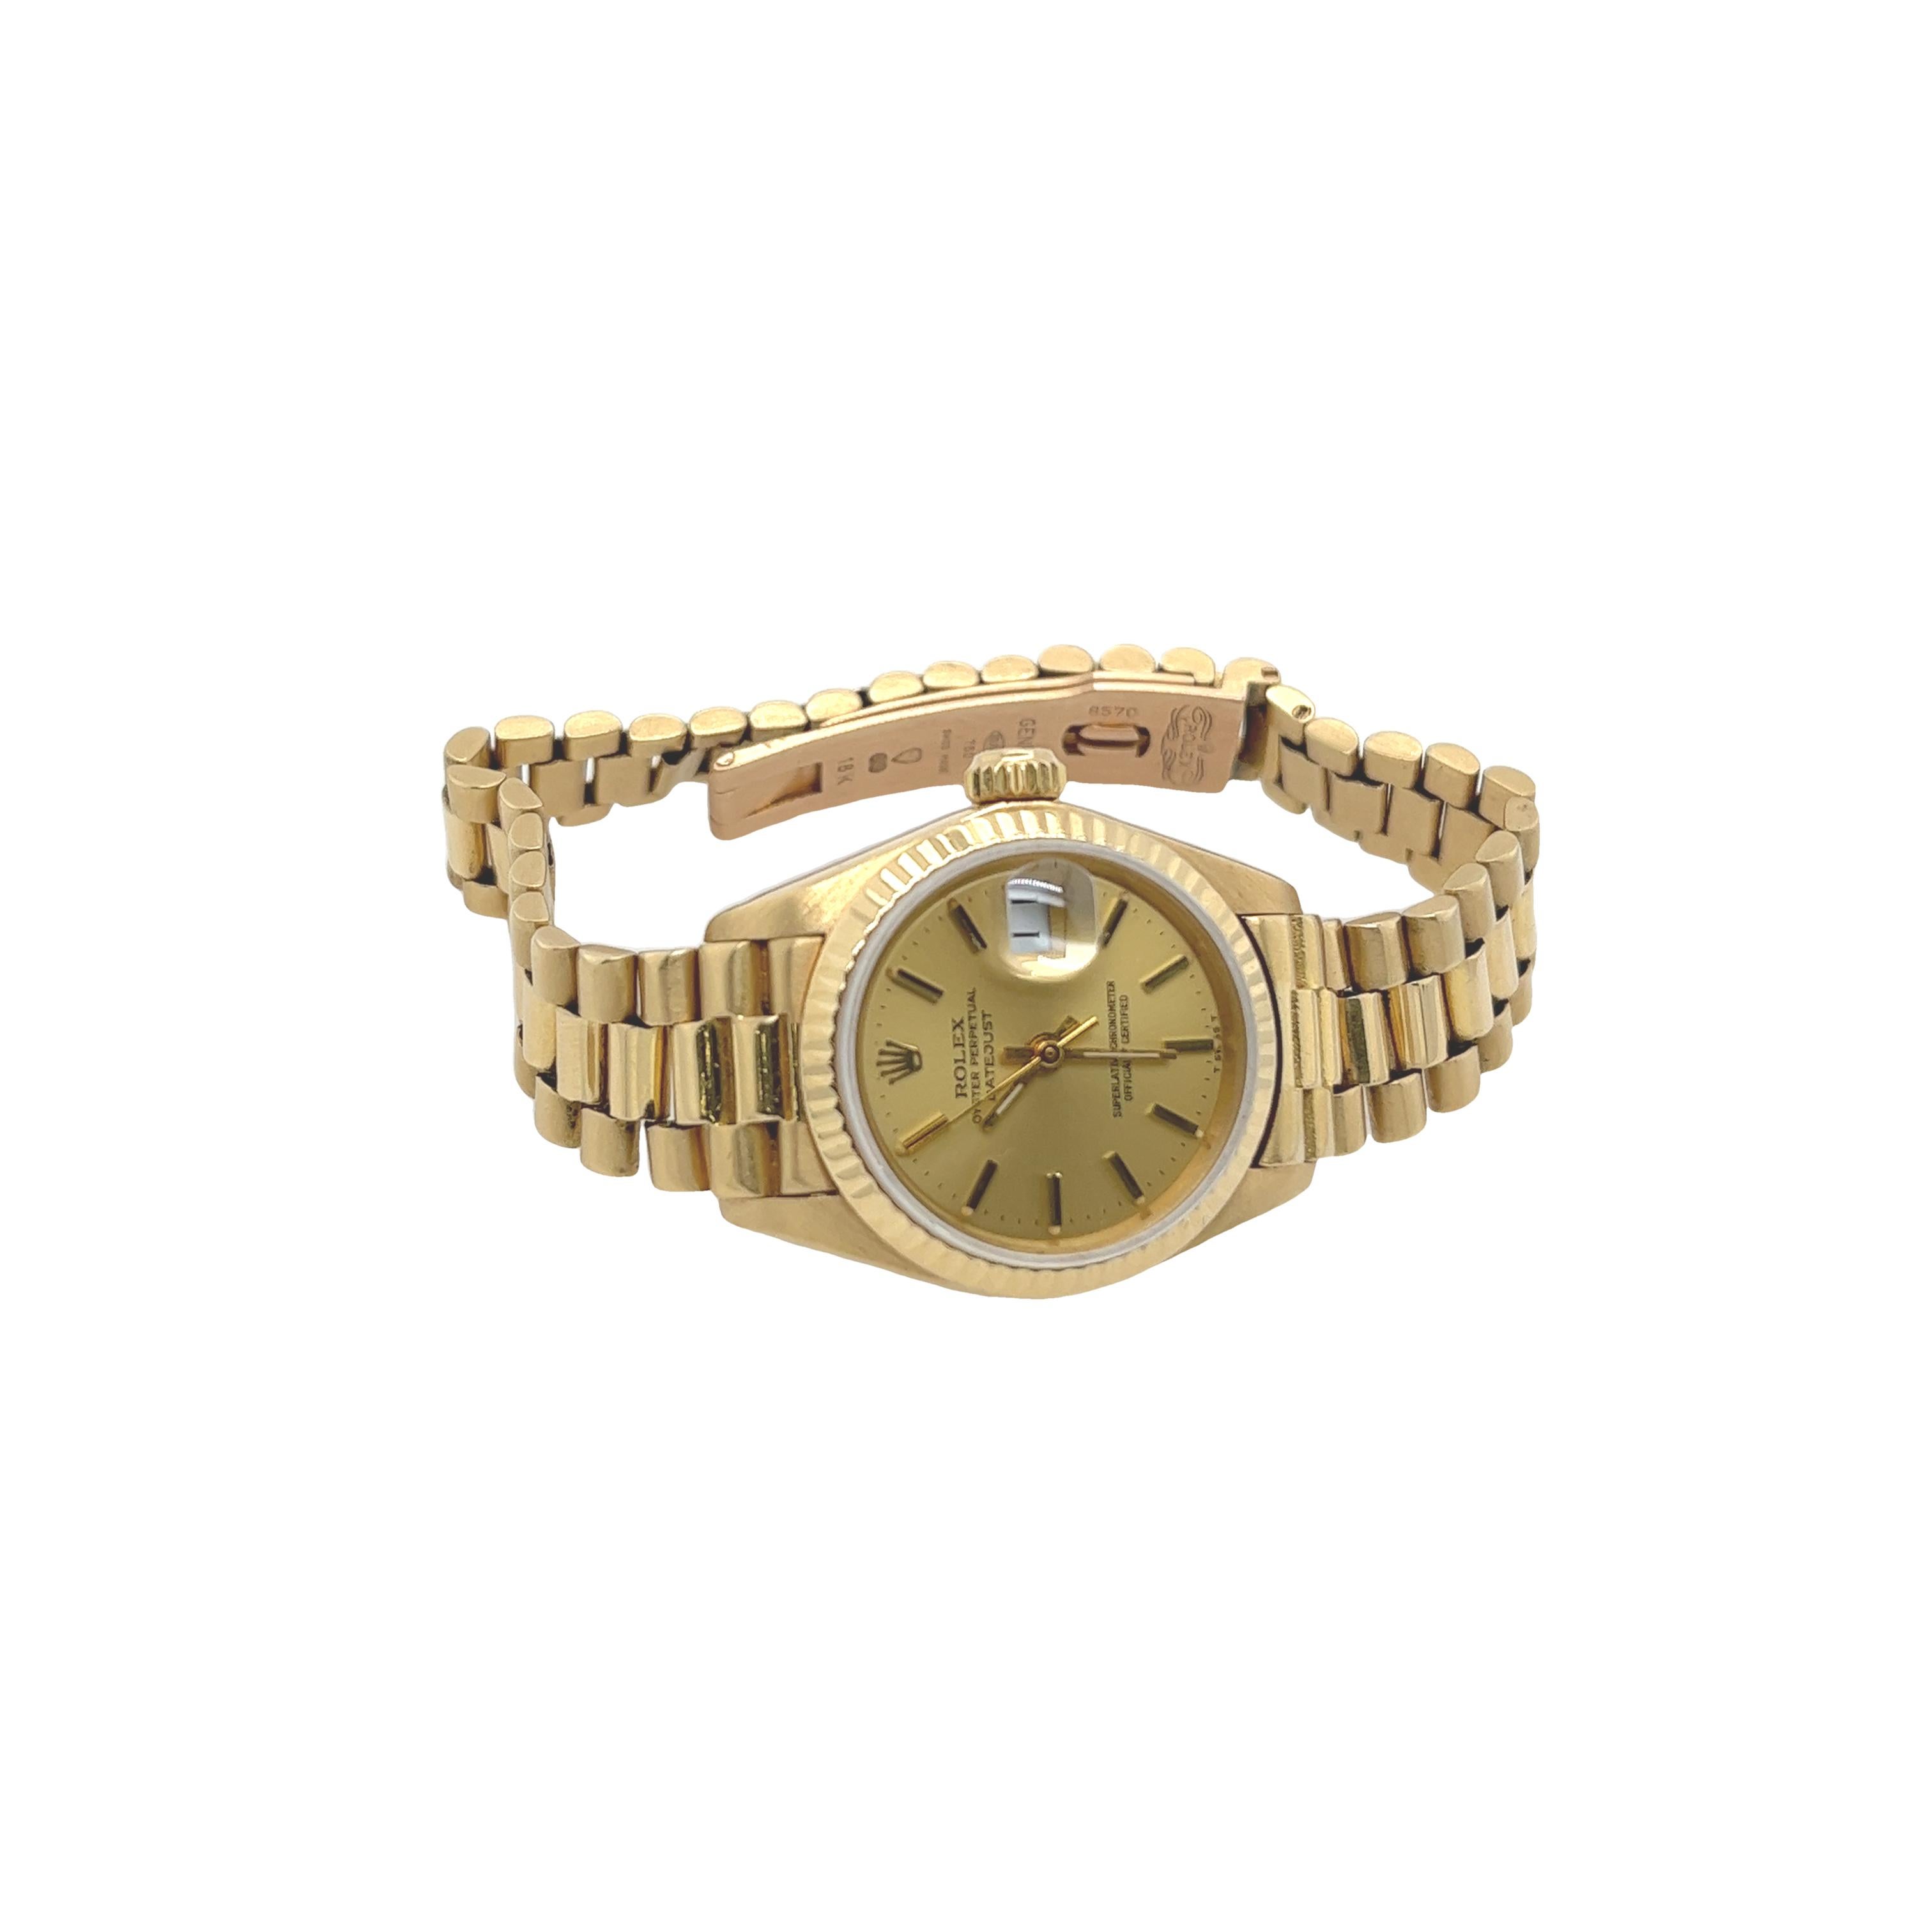 Rolex Ladies Datejust 18ct Yellow Gold President Bracelet Is a timeless piece, With original box, no papers.

Total Weight: 66.6g
18ct yellow gold
Case size: 26mm
Dial Colour: Gold
Crystal: Sapphire
Serial No.8570
Rolex Box 
APPO80